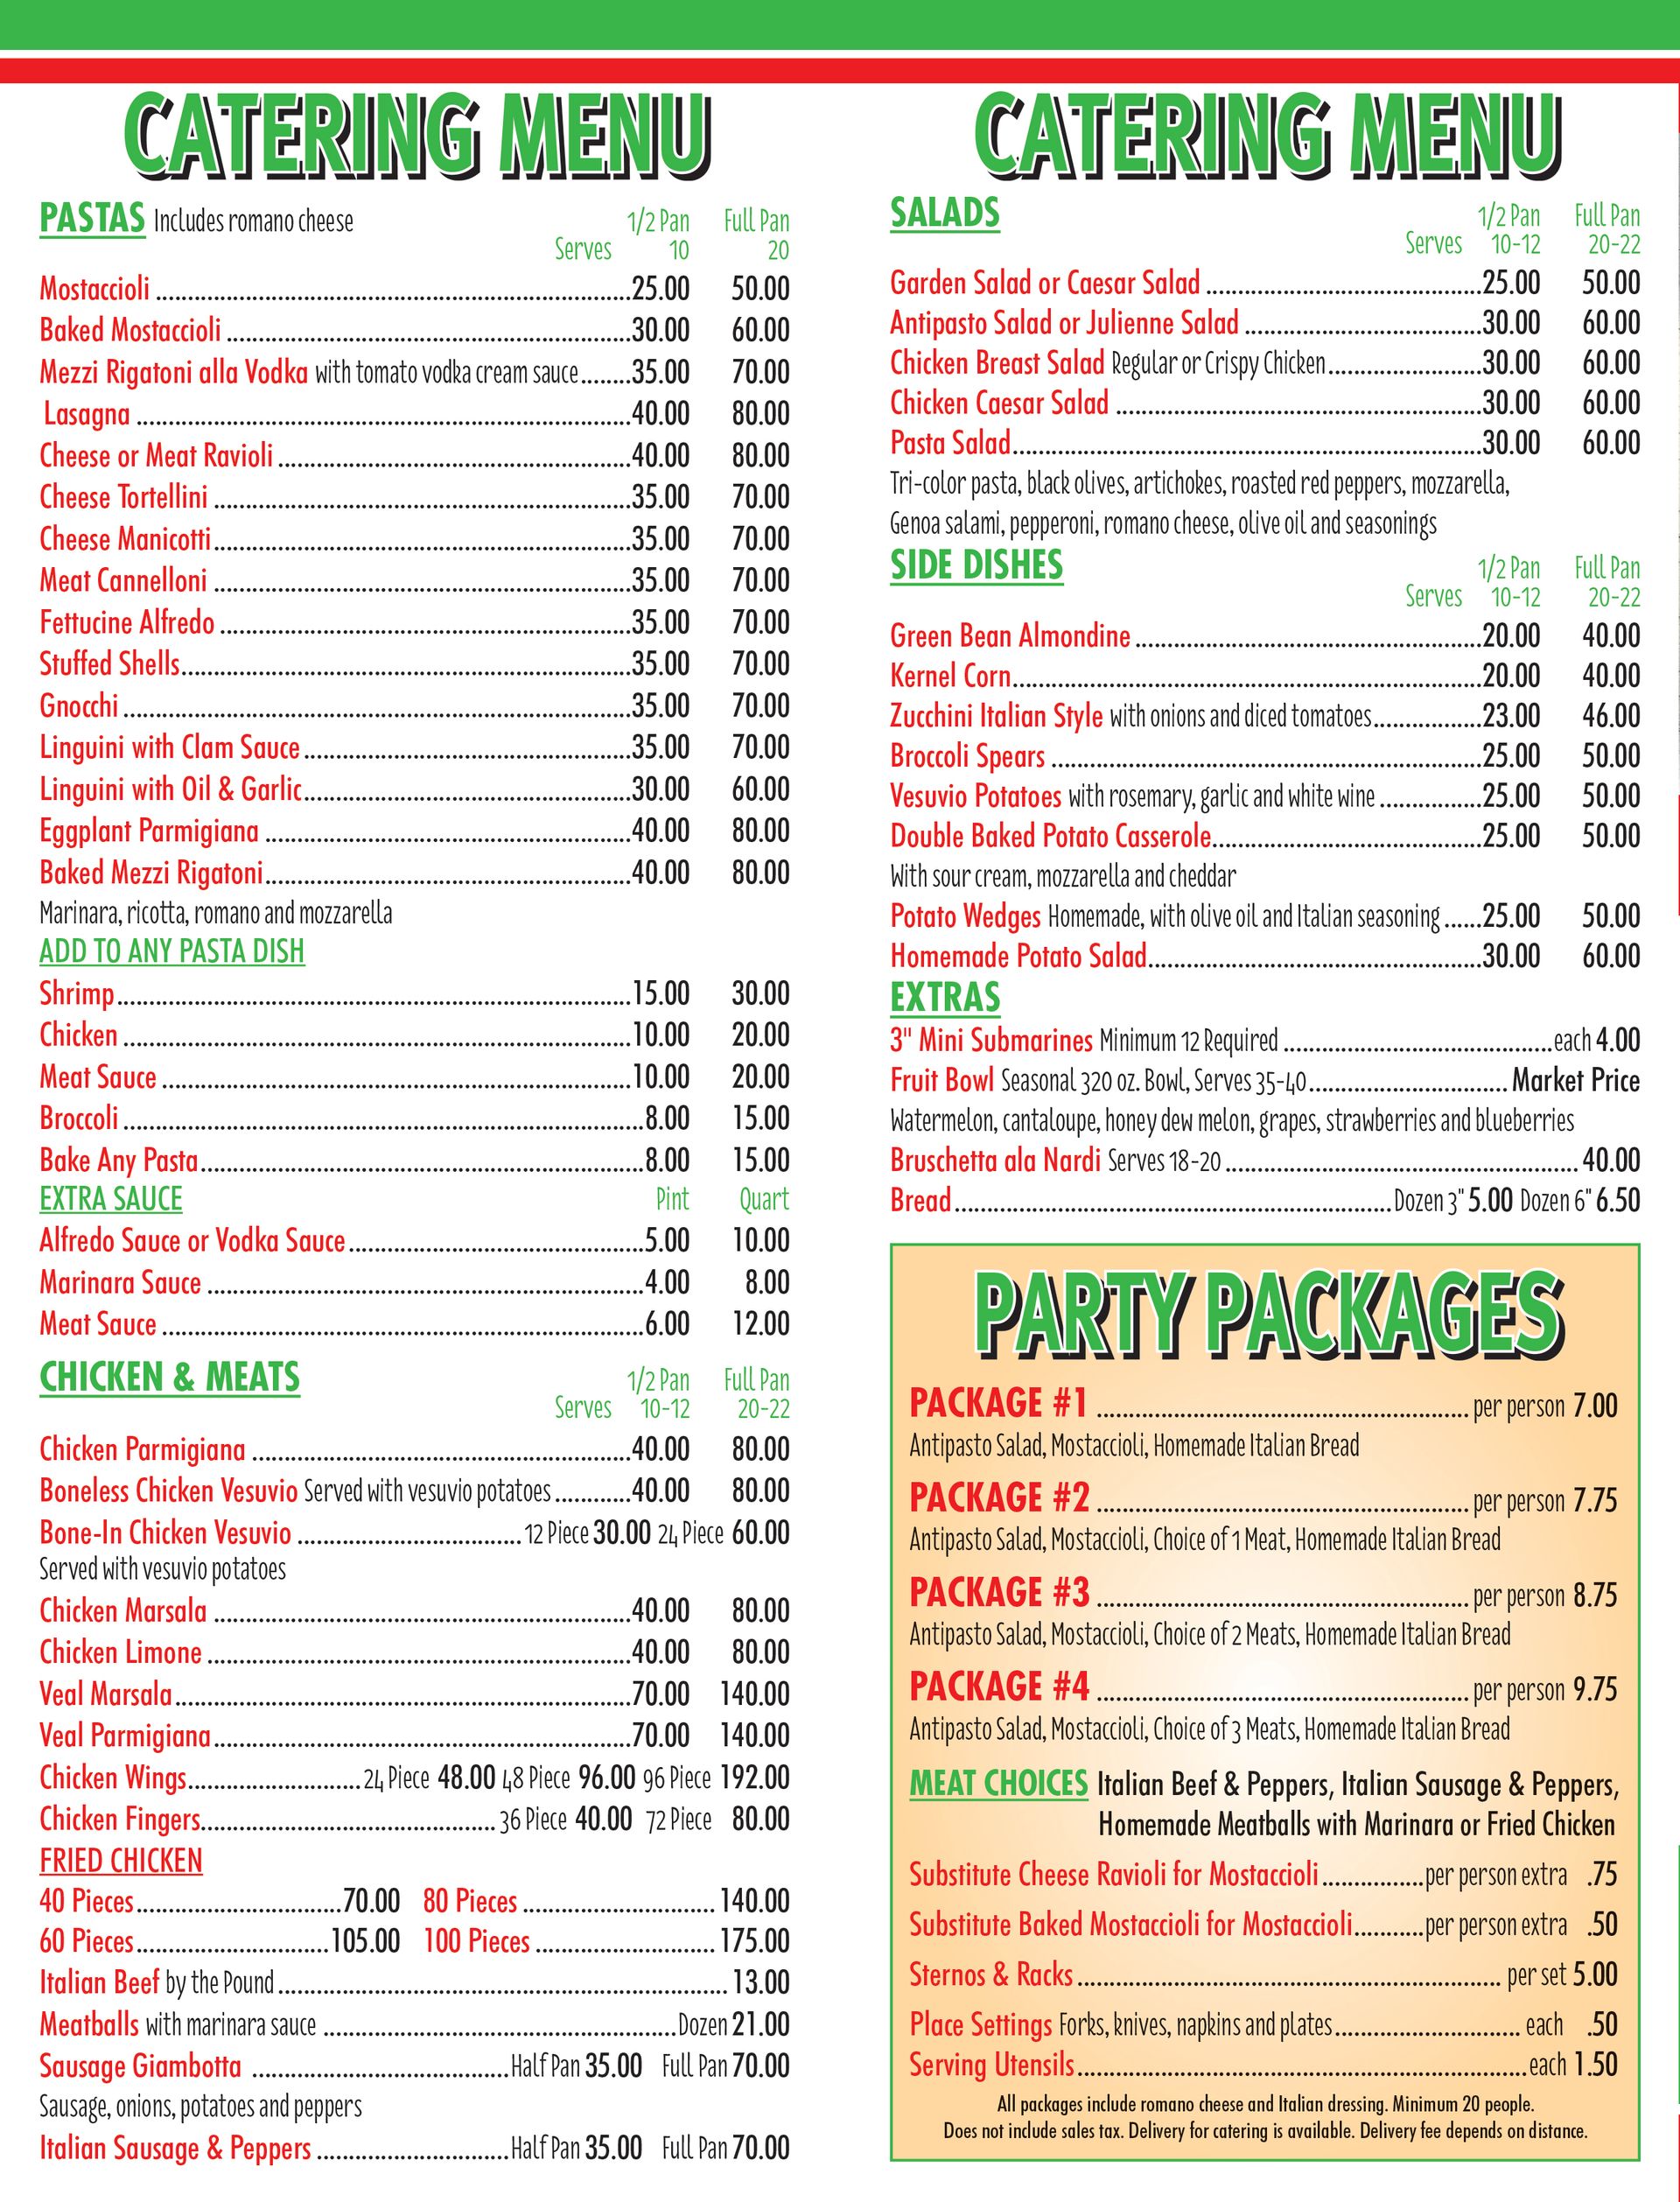 A menu for a restaurant with a catering menu and party packages.